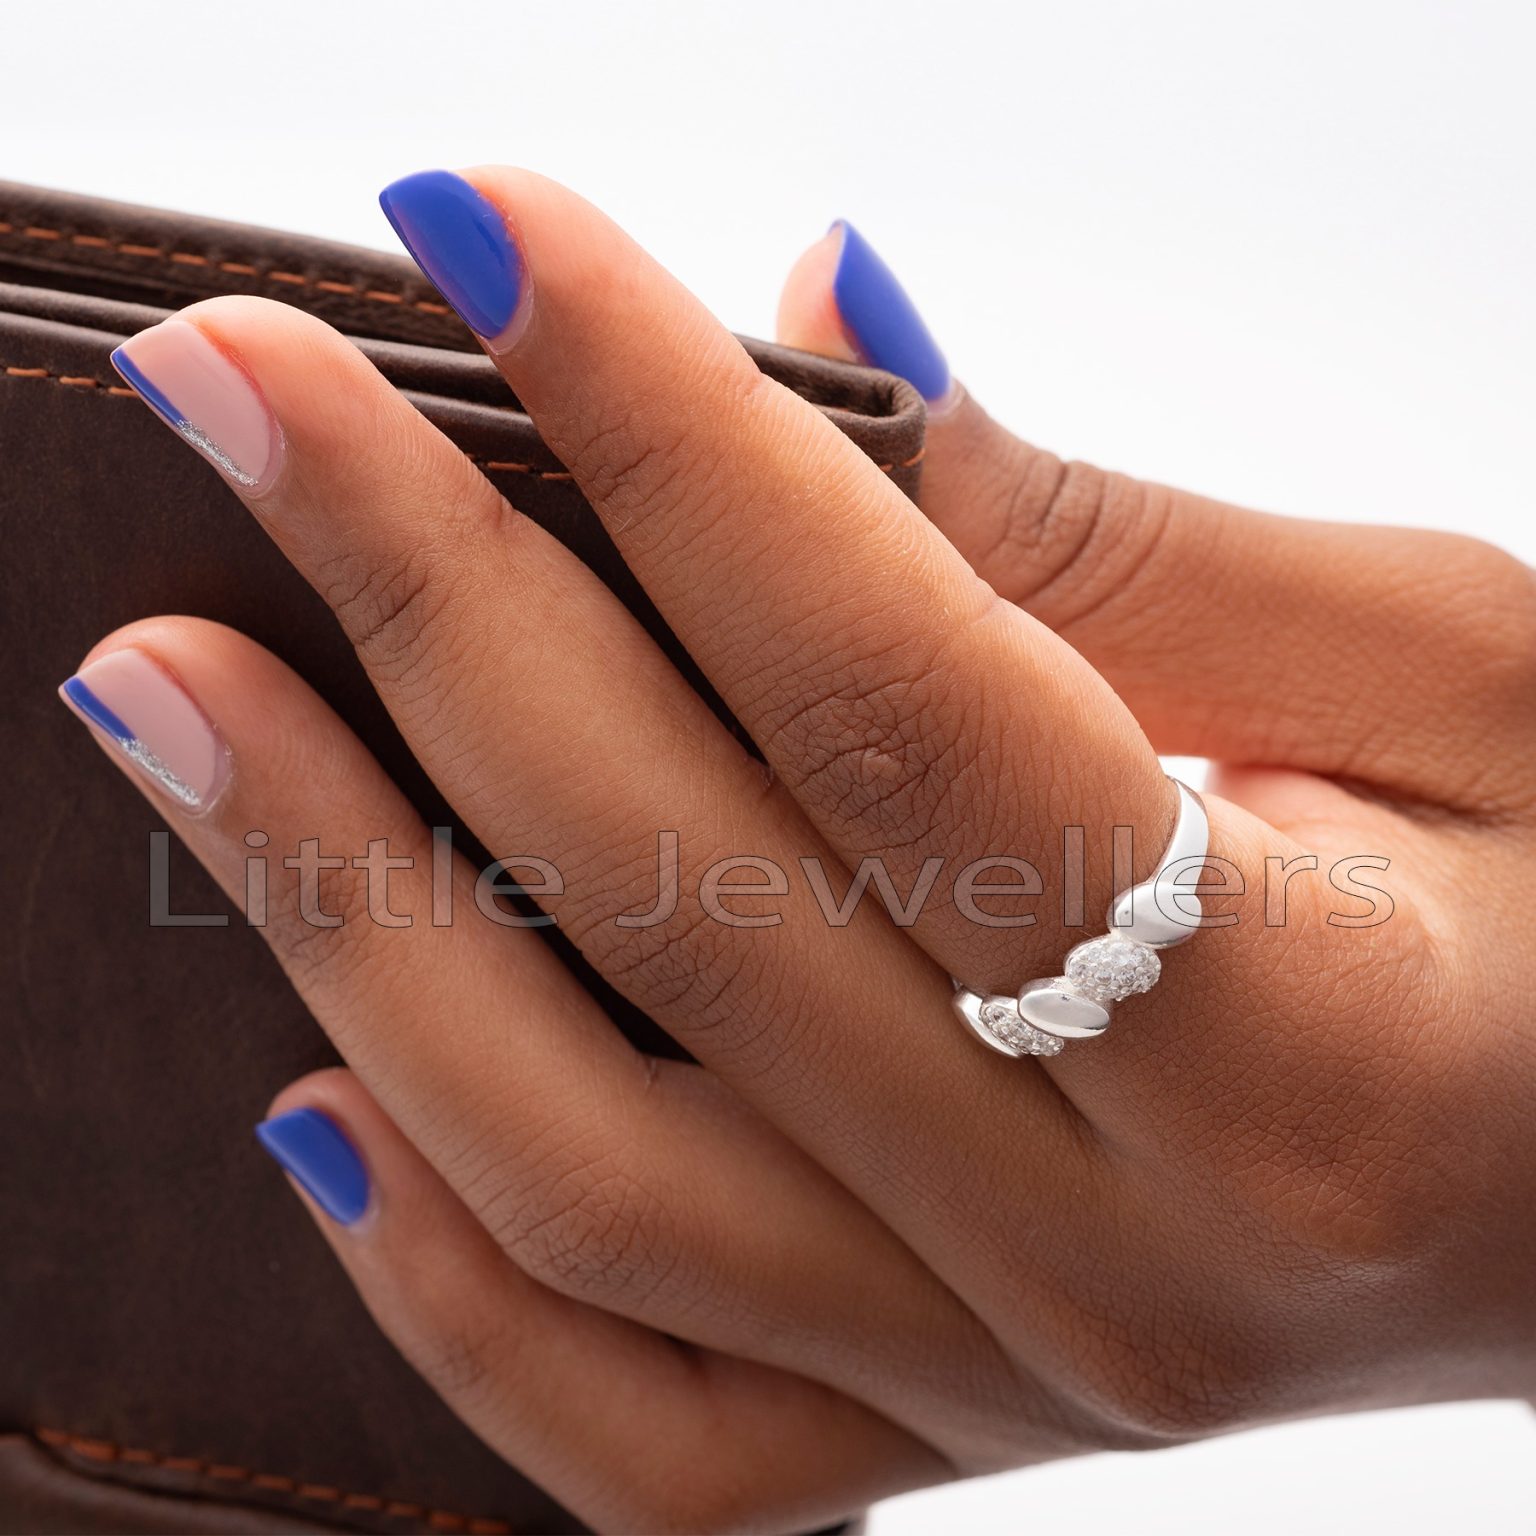 Introducing a perfect everyday ring that is not an engagement or wedding ring - the ideal choice for casual rings in Nairobi. Crafted from sterling silver and embellished with subtle zirconia stones.